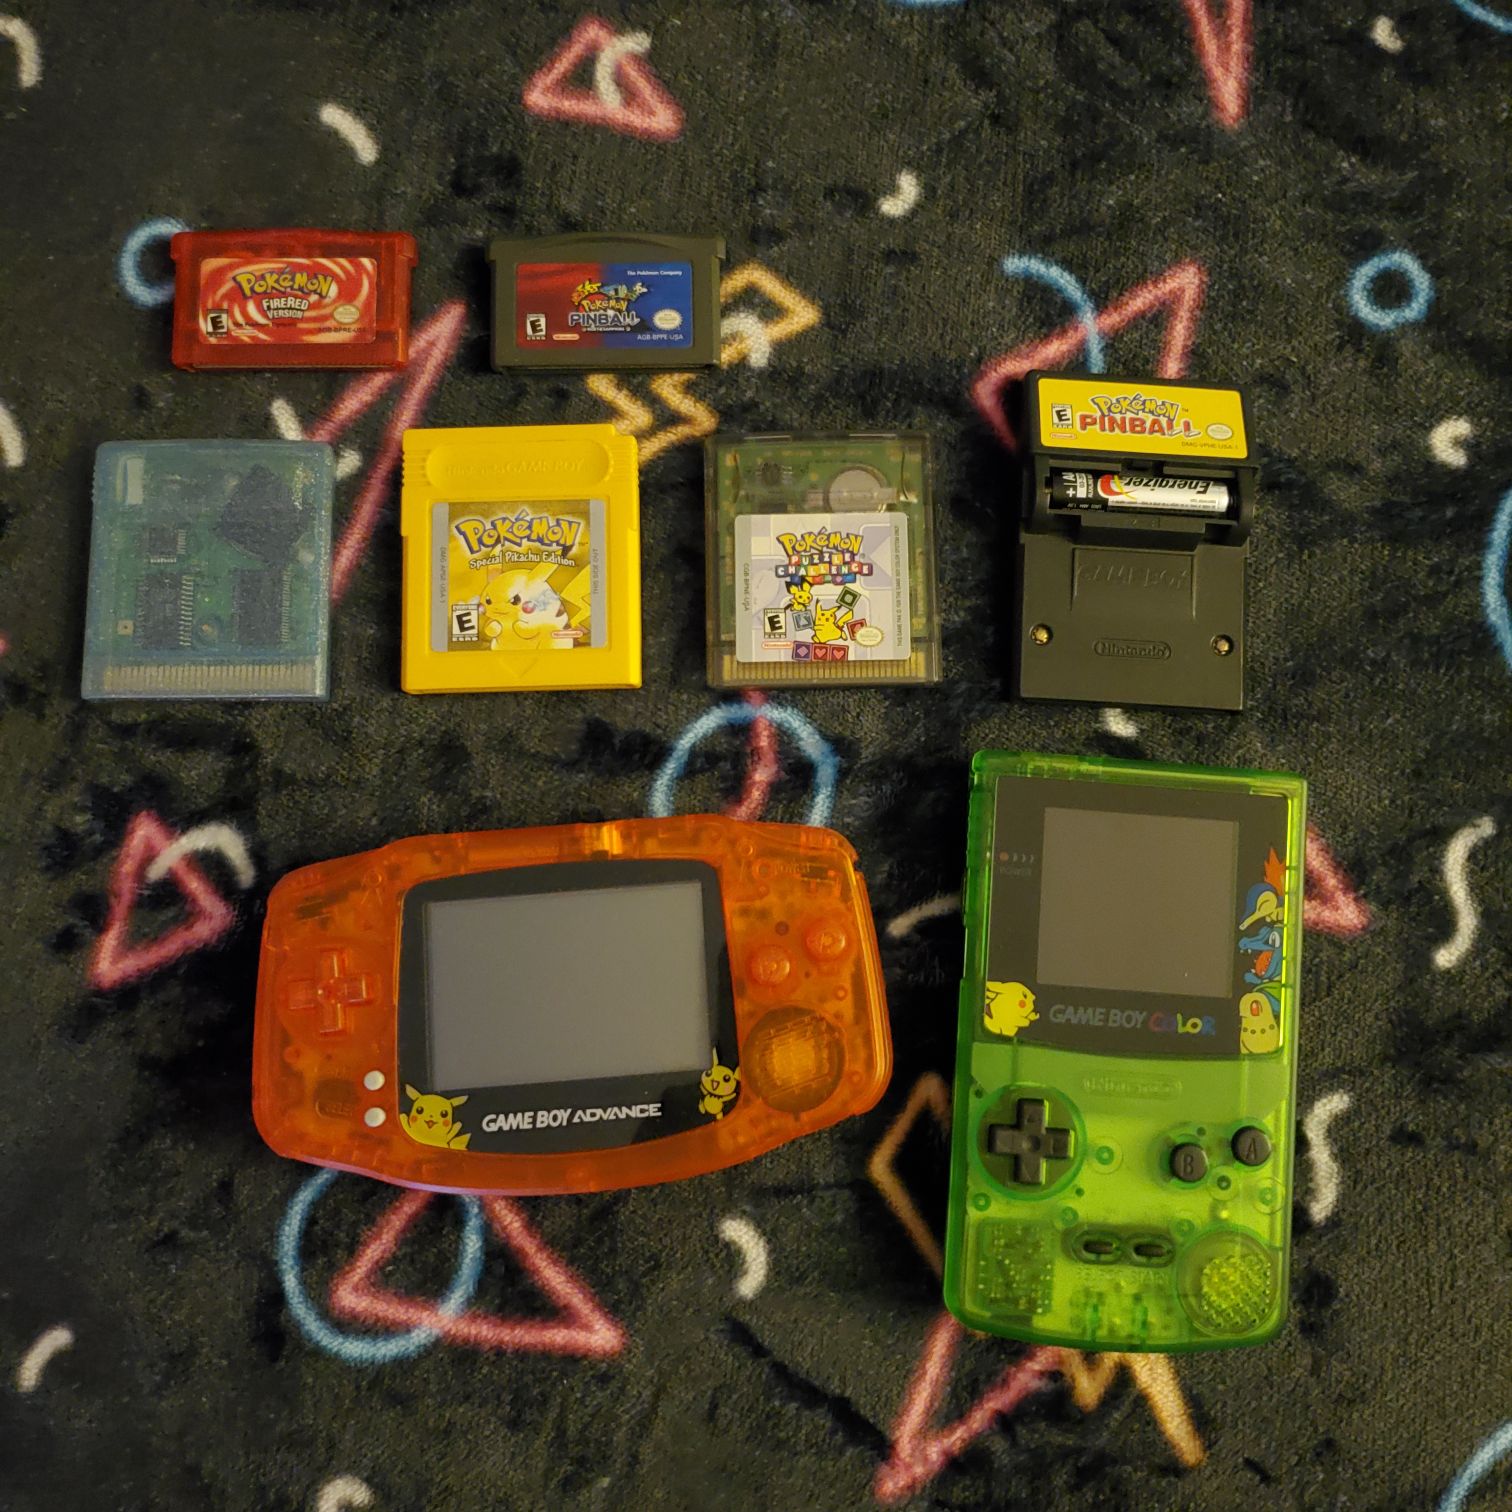 Pokemon Fire Red, Pinball: Ruby and Sapphire, Crystal, Yellow, Puzzle Challenge, Pinball, as well as two pokemon-themed gameboy systems